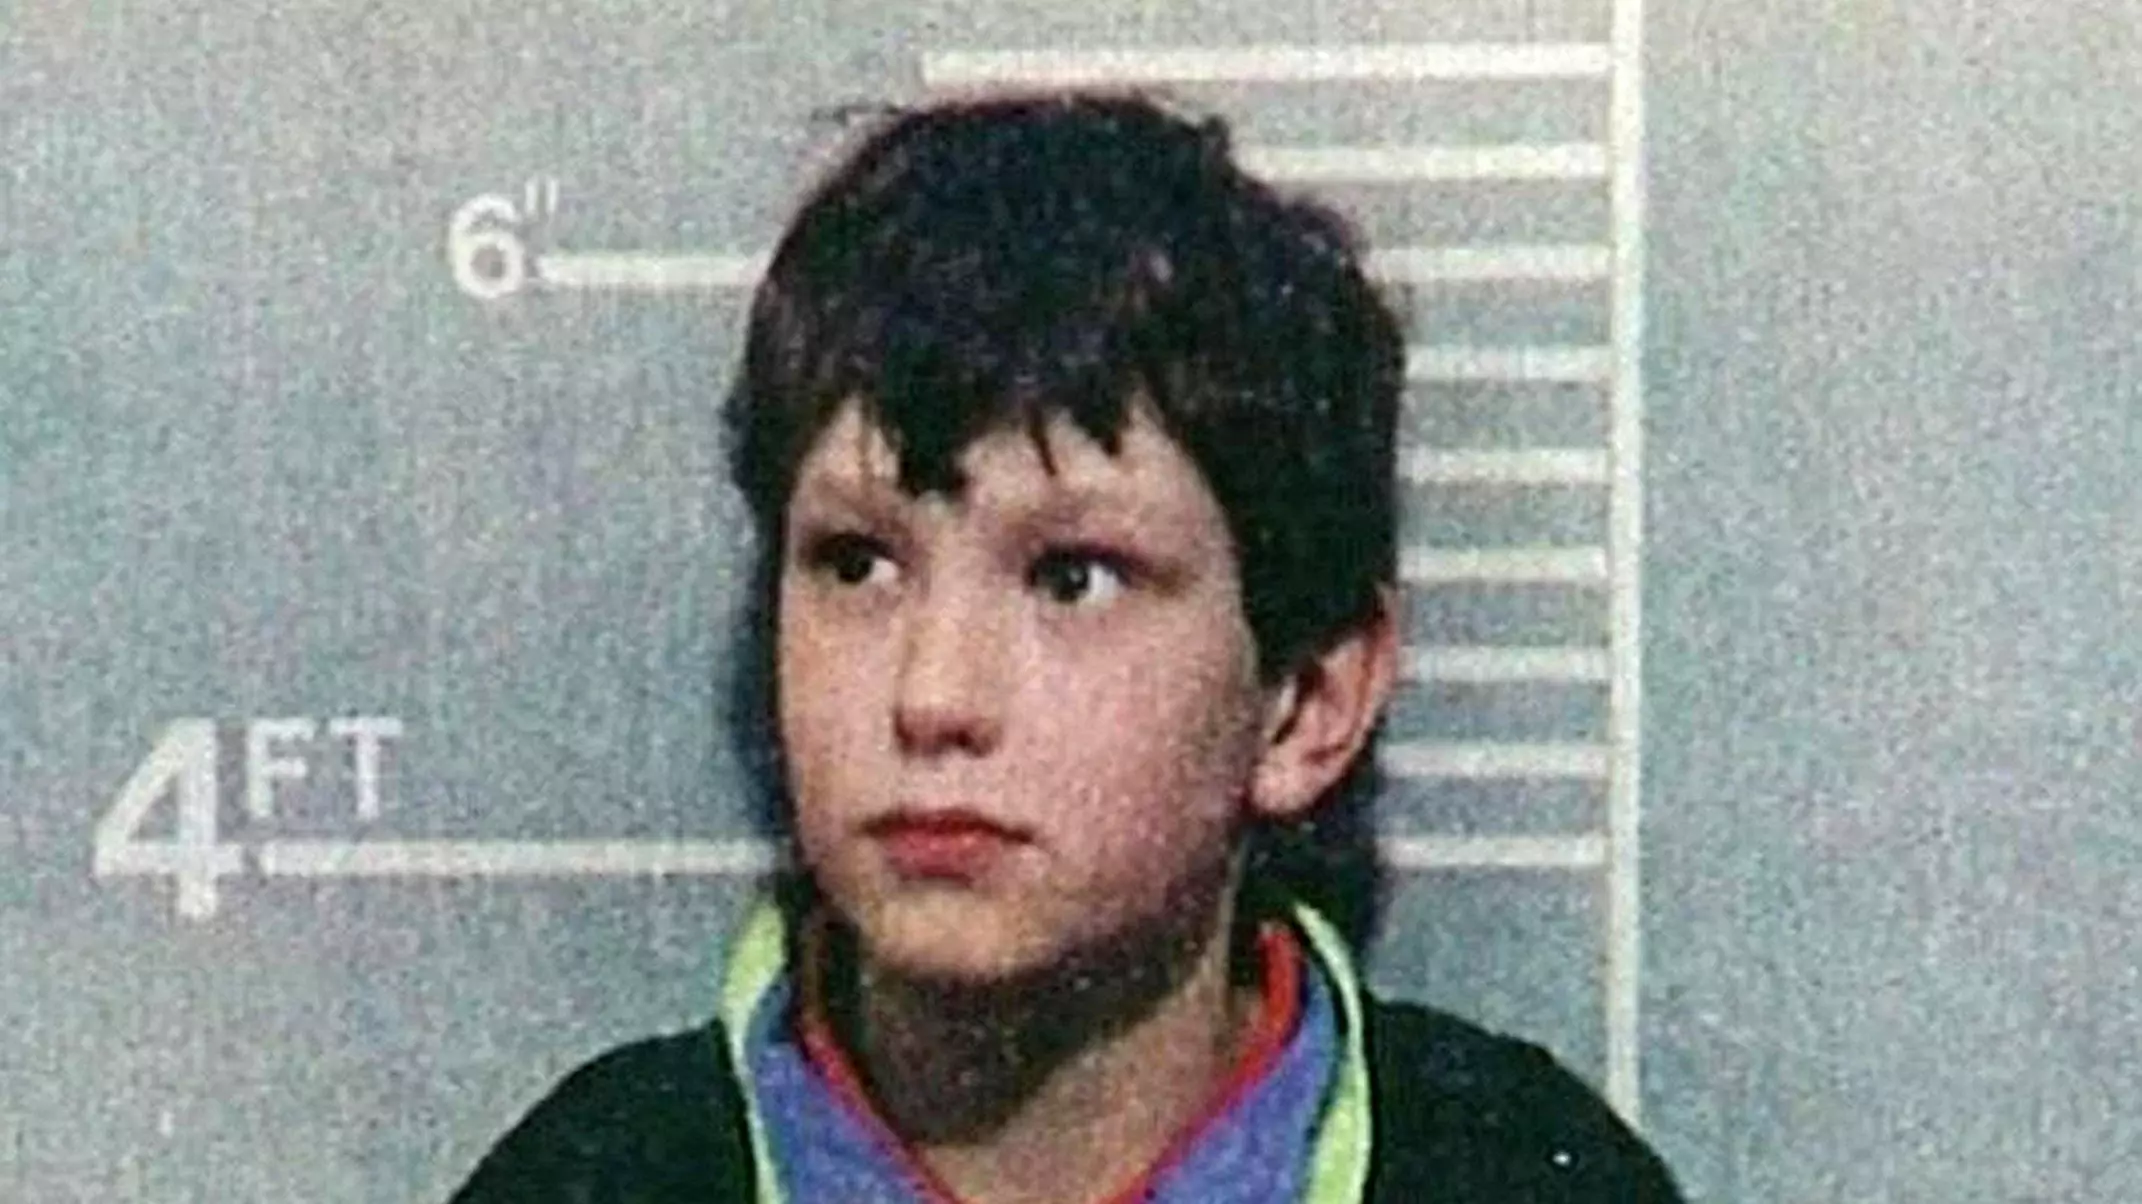 ​James Bulger’s Dad ‘Furious’ At £260k Legal Aid For Son’s Killer